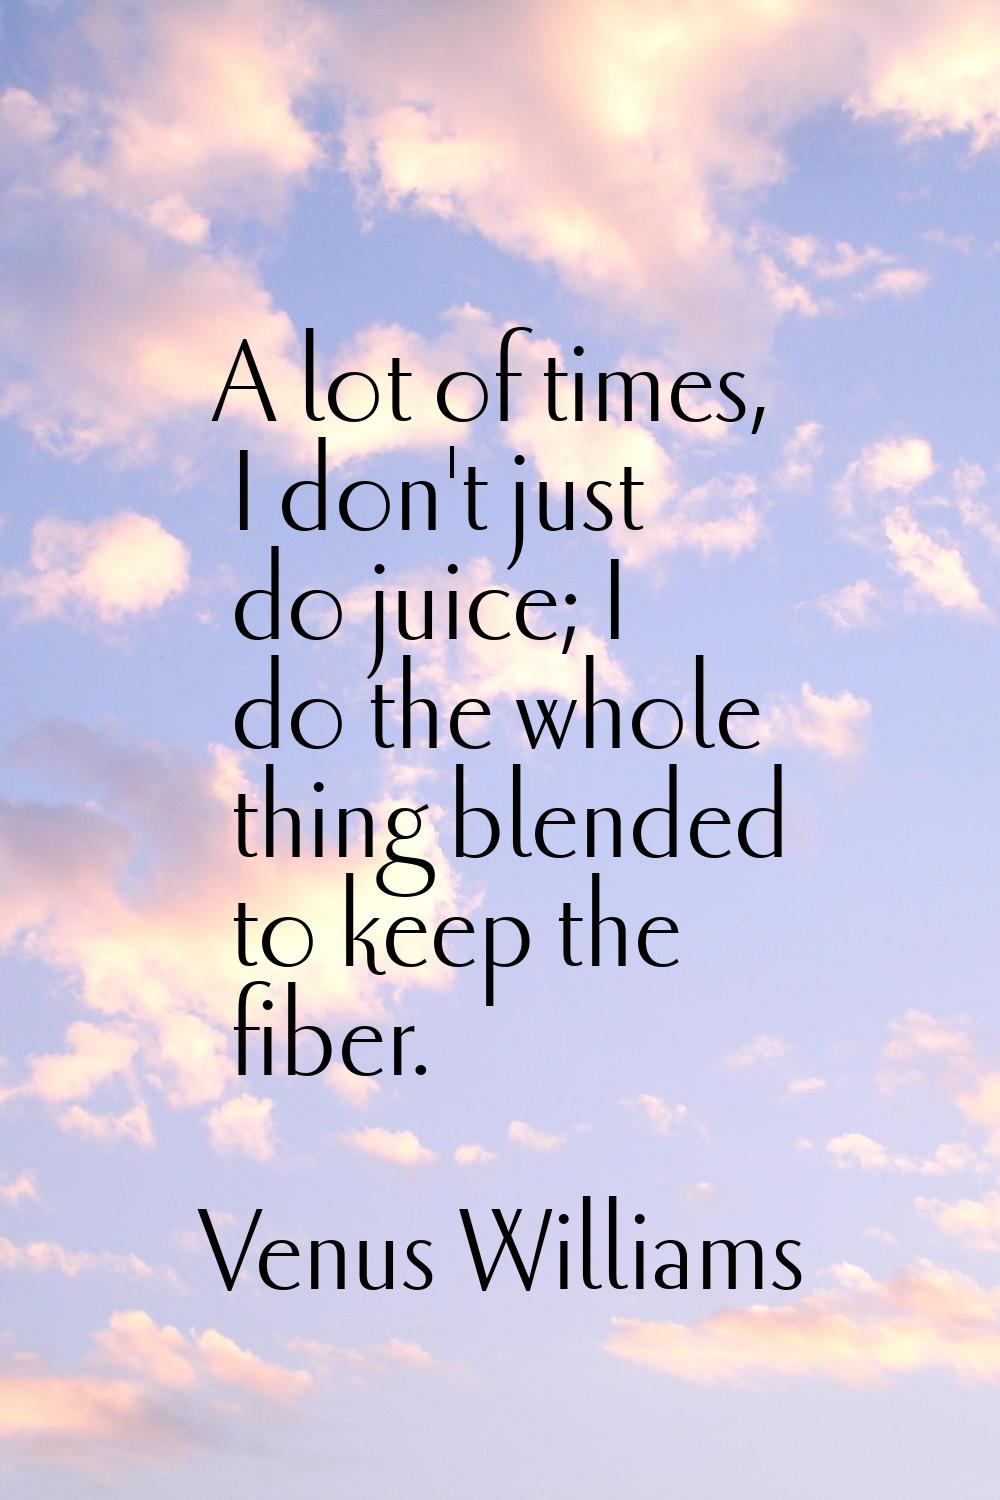 A lot of times, I don't just do juice; I do the whole thing blended to keep the fiber.